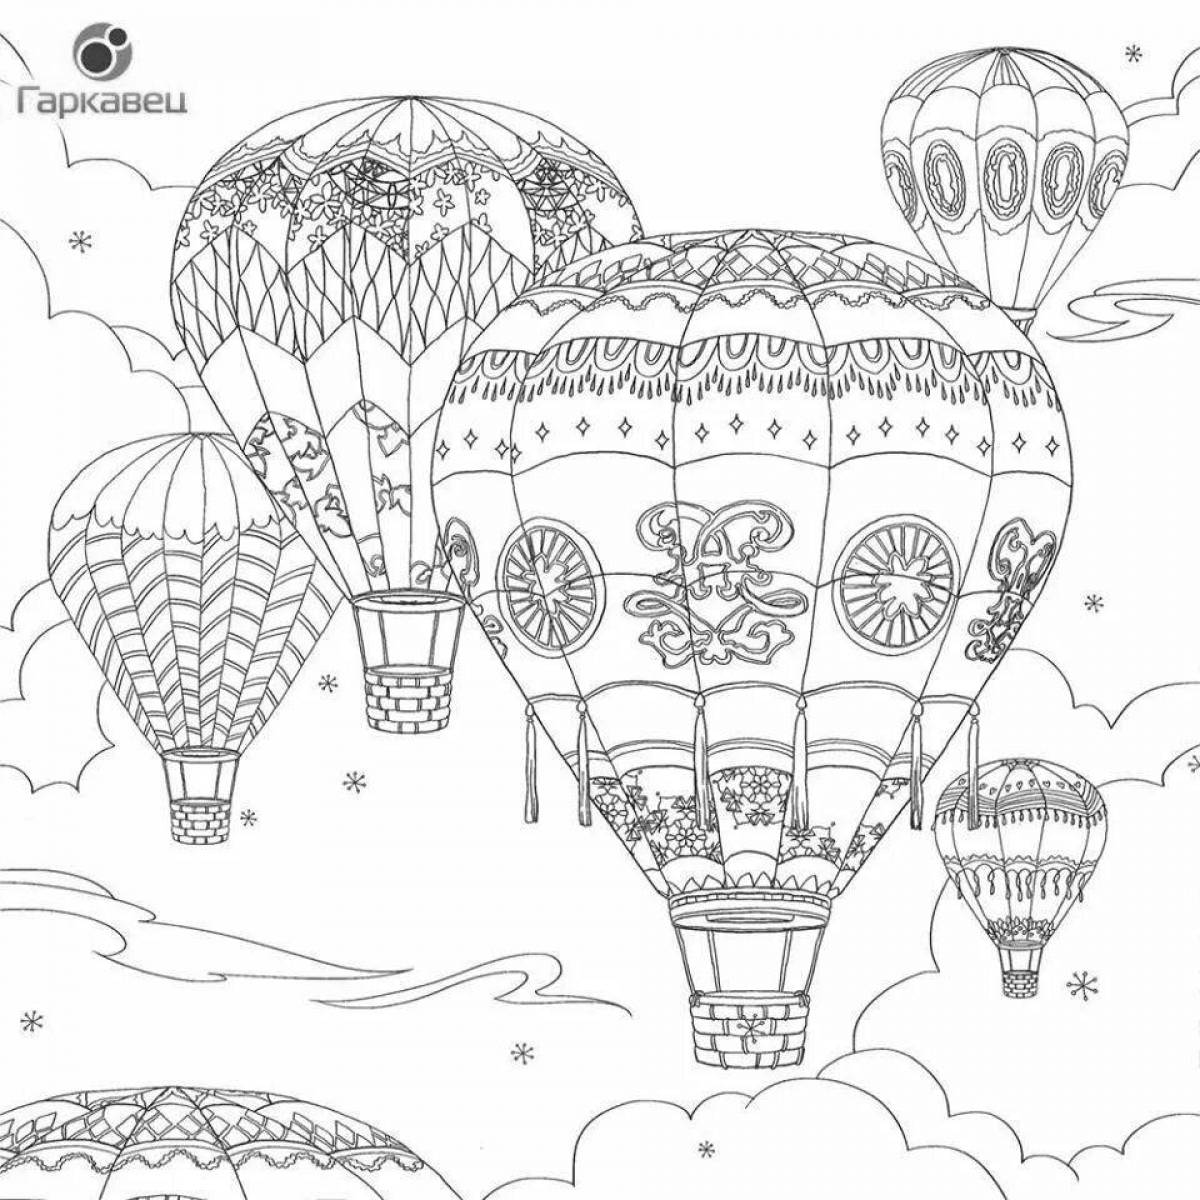 Playful travel coloring page